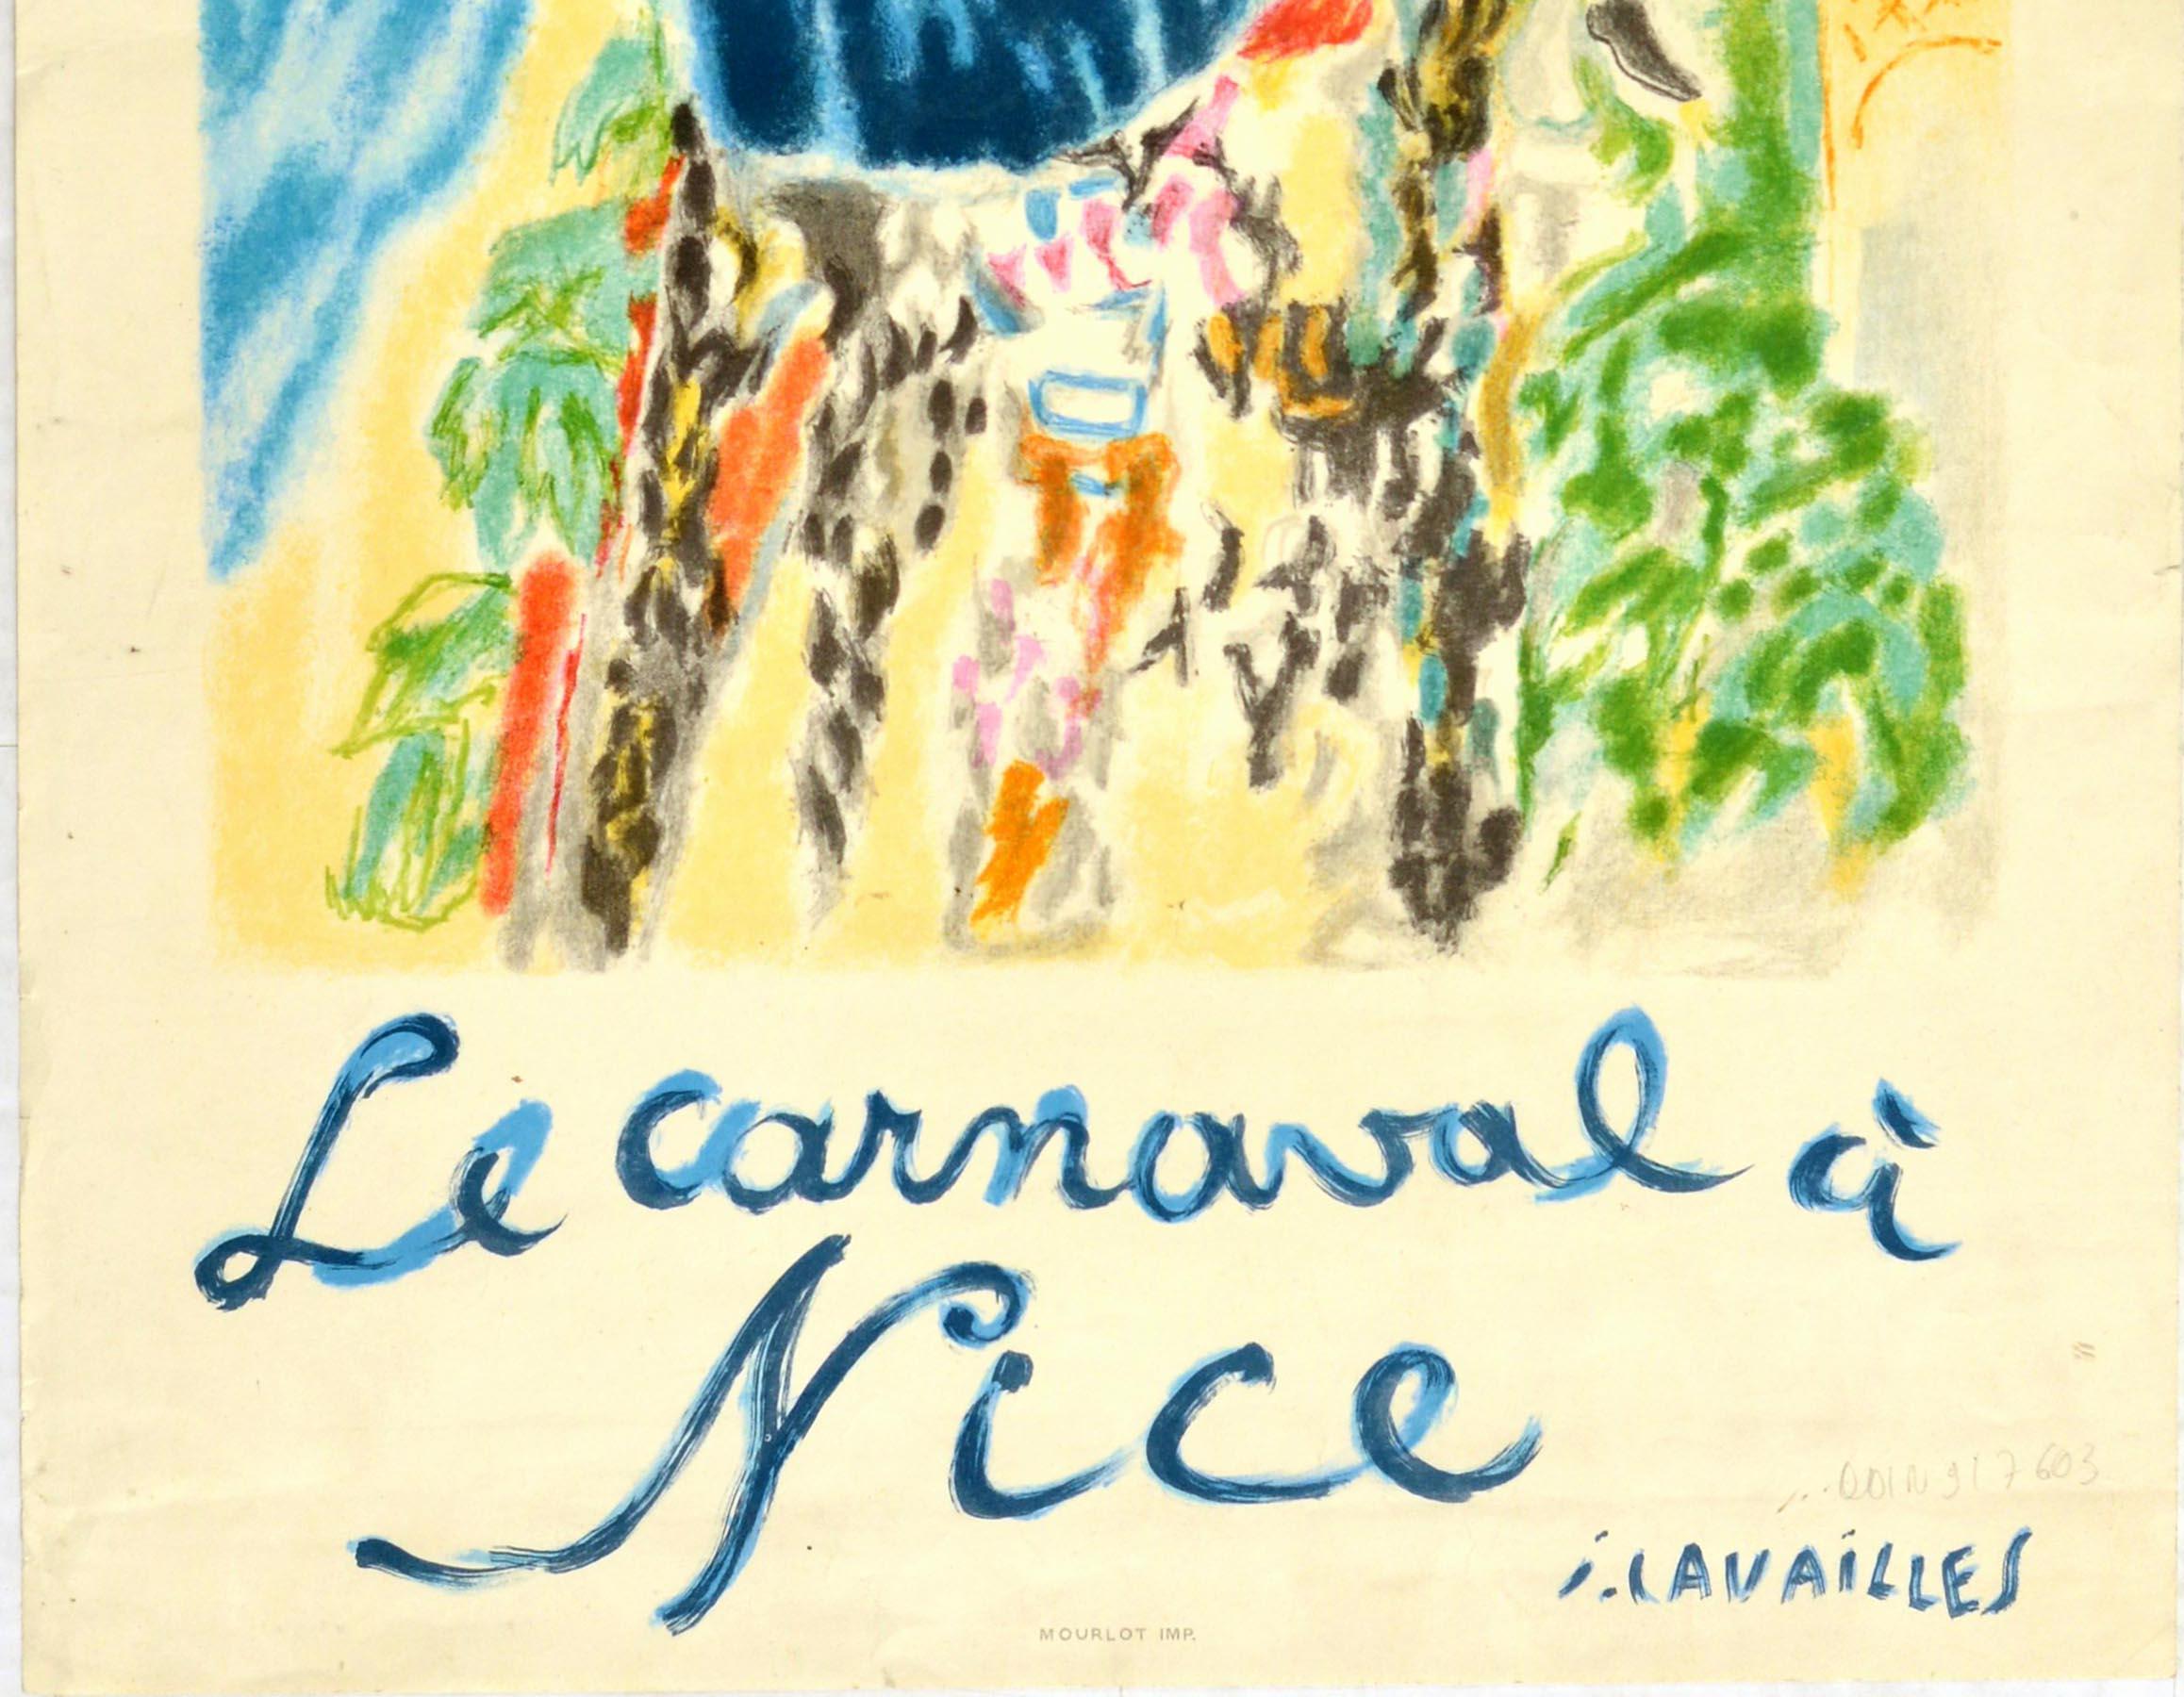 Original vintage travel poster for the Carnival of Nice / Le Carnaval a Nice from 28 January to 9 February 1967 featuring colourful artwork by the French painter Jules Cavailles (1901-1977) of a lady wearing traditional clothing with an apron and